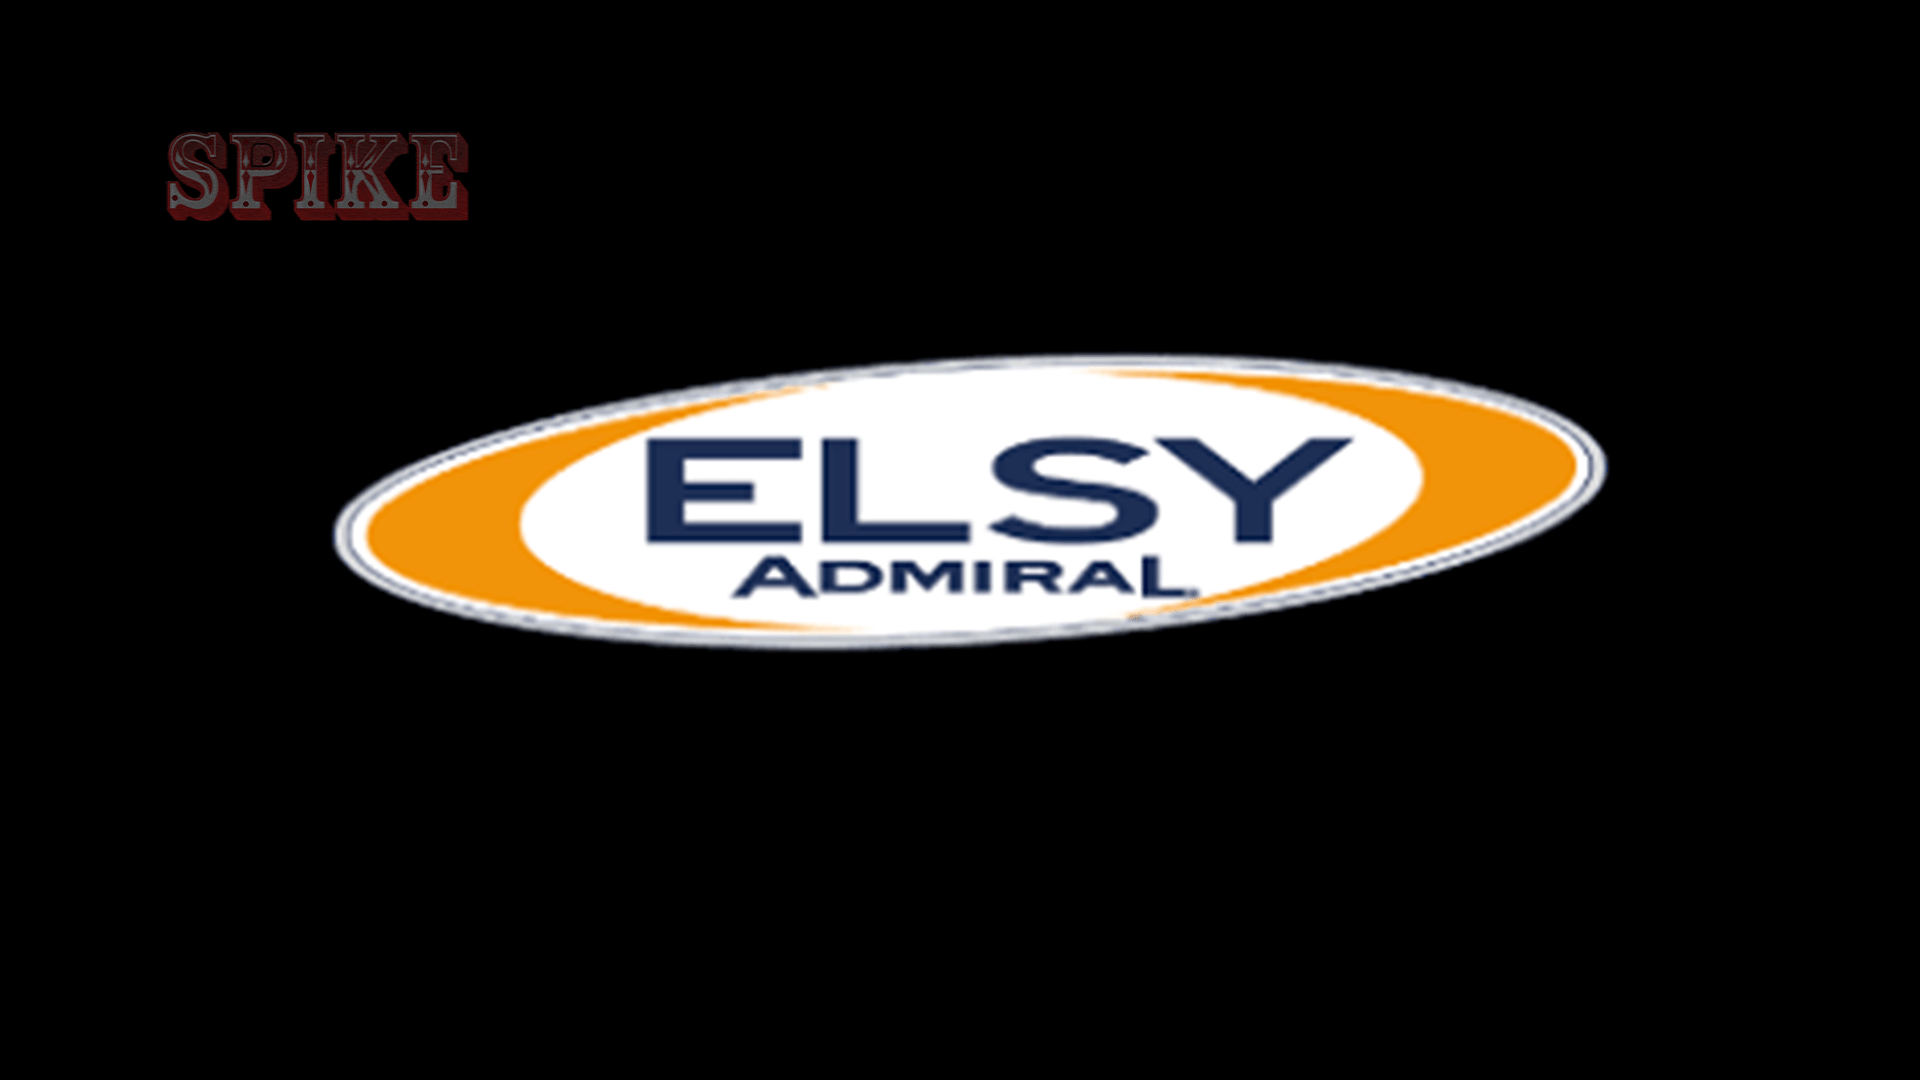 elsy admiral slot producer free demo online